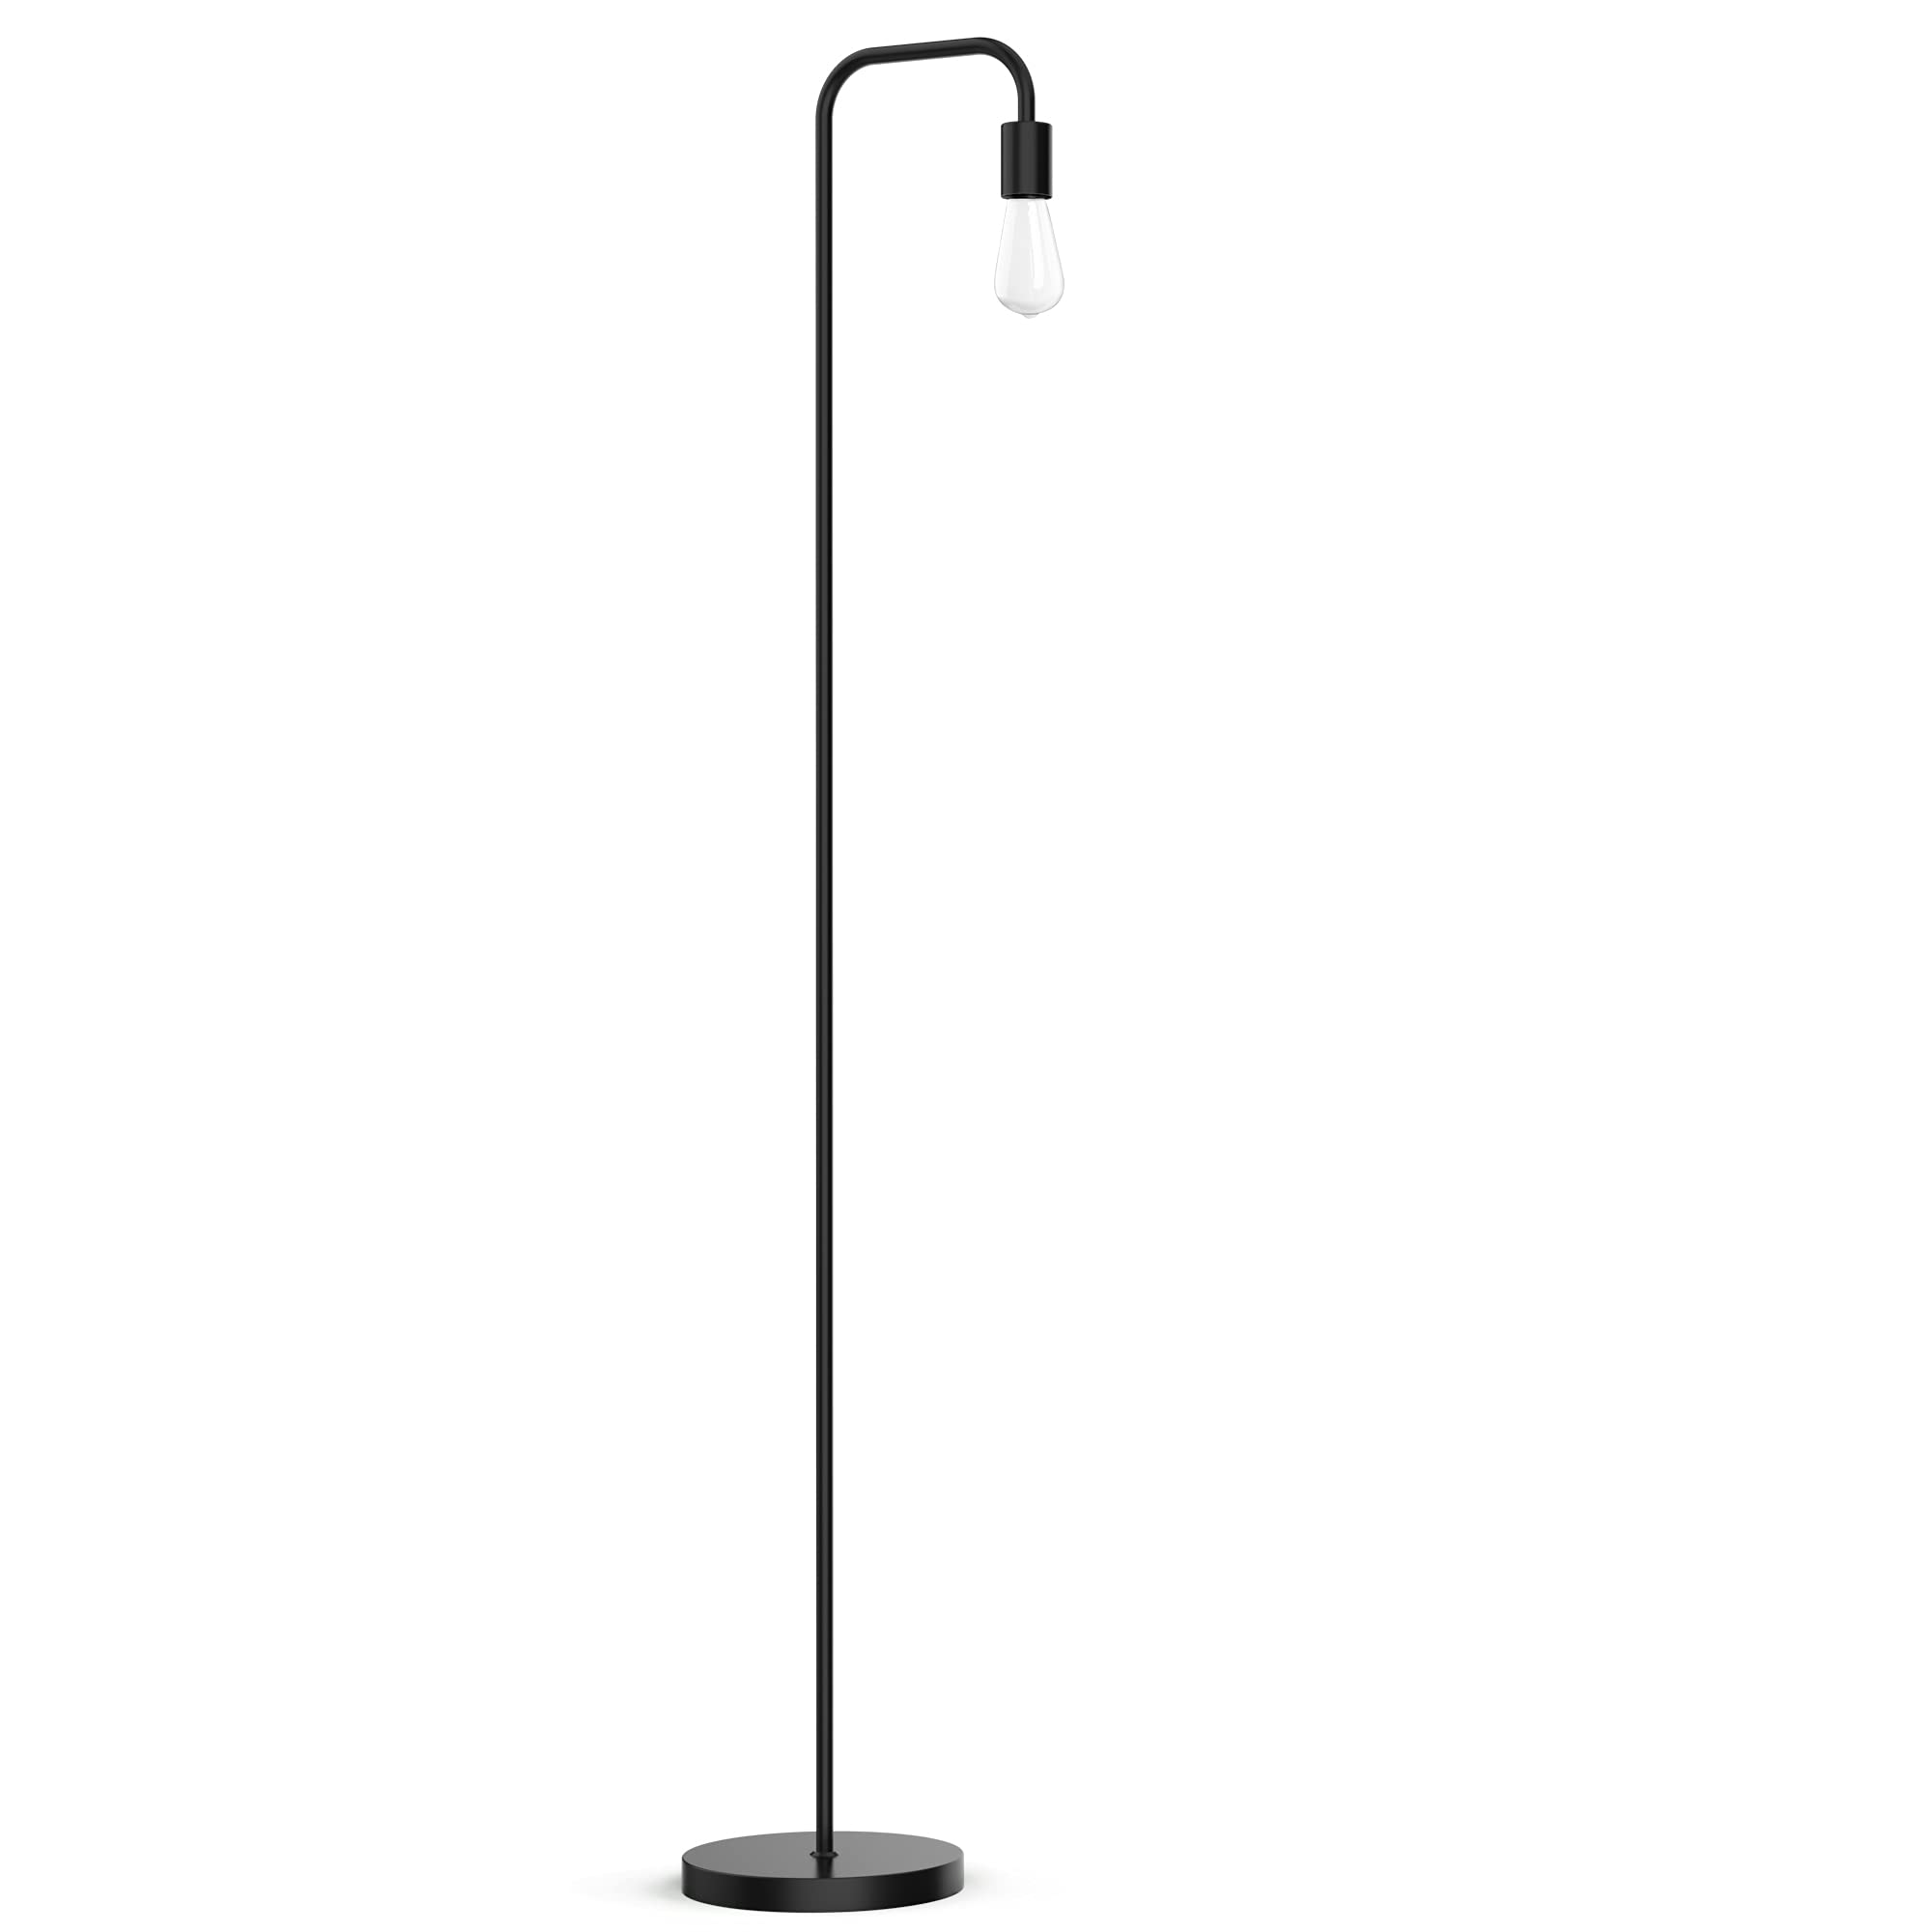 Floor Lamp, Industrial Floor Lamp, Led Light Bulb Included, in-line On/Off Foot Switch, Fits for Living Room, Bedroom, Near Window, Matte Black